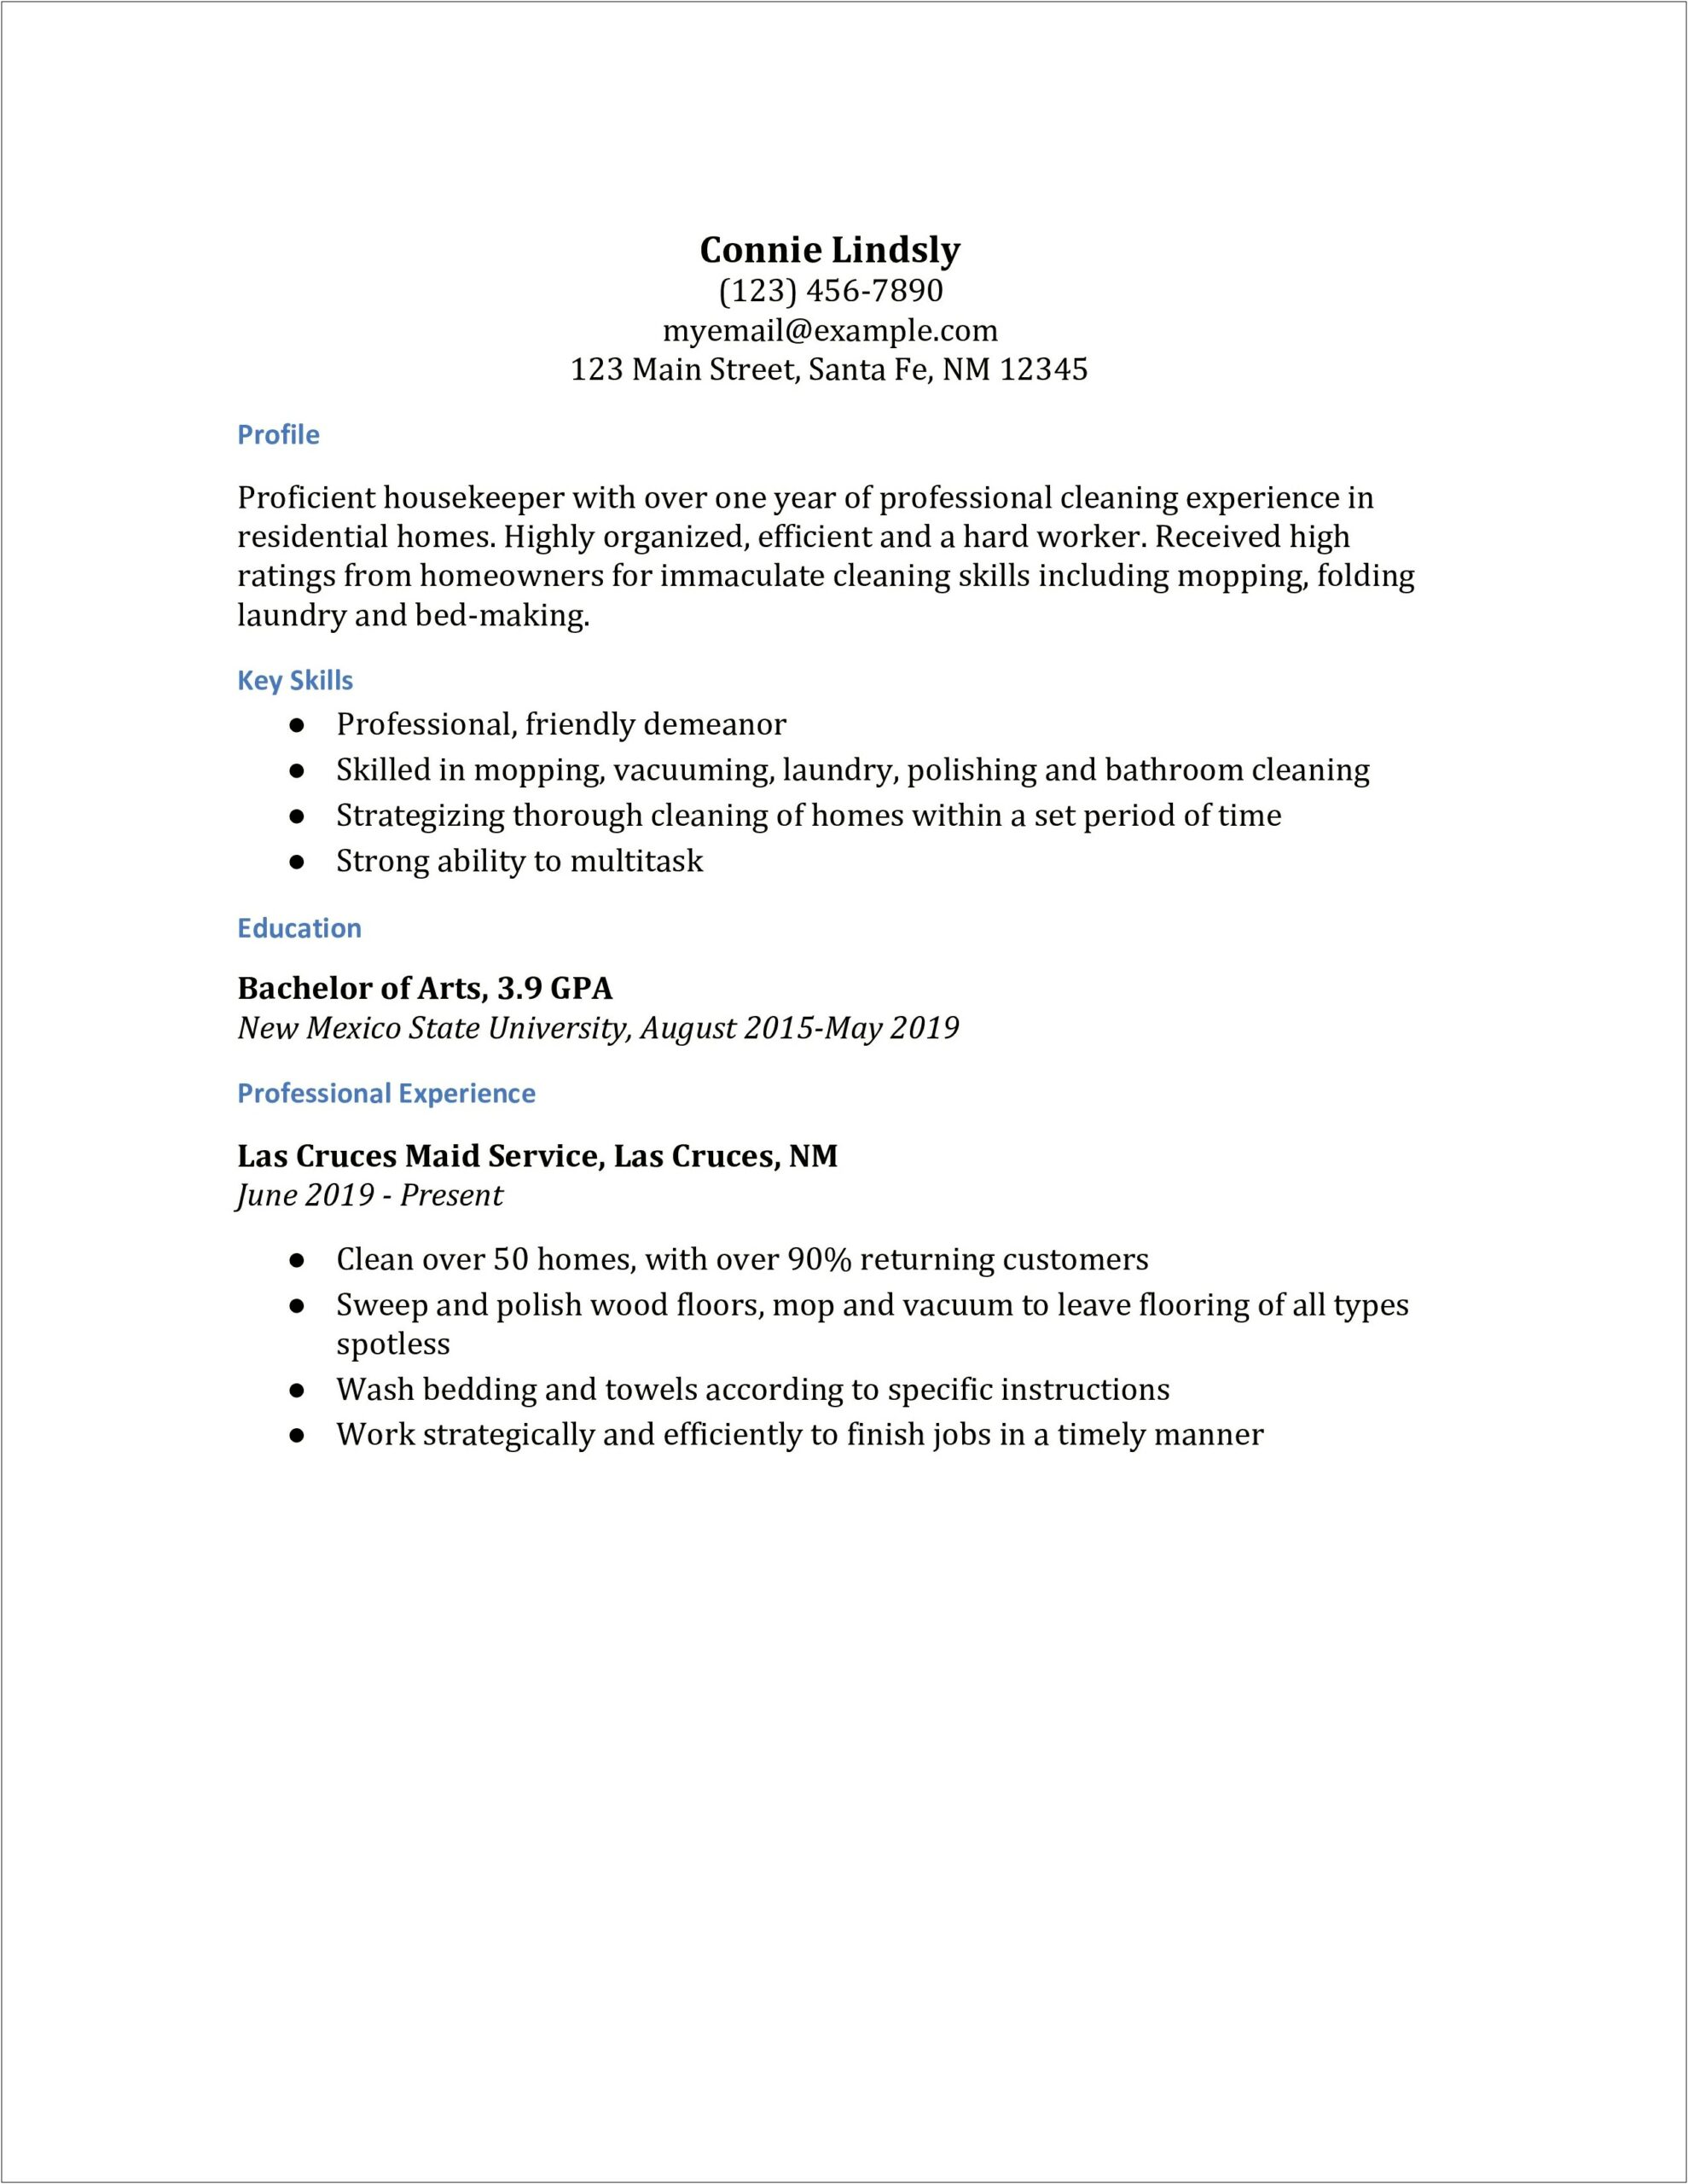 Resume With Housekeeoing And Laundry Experience